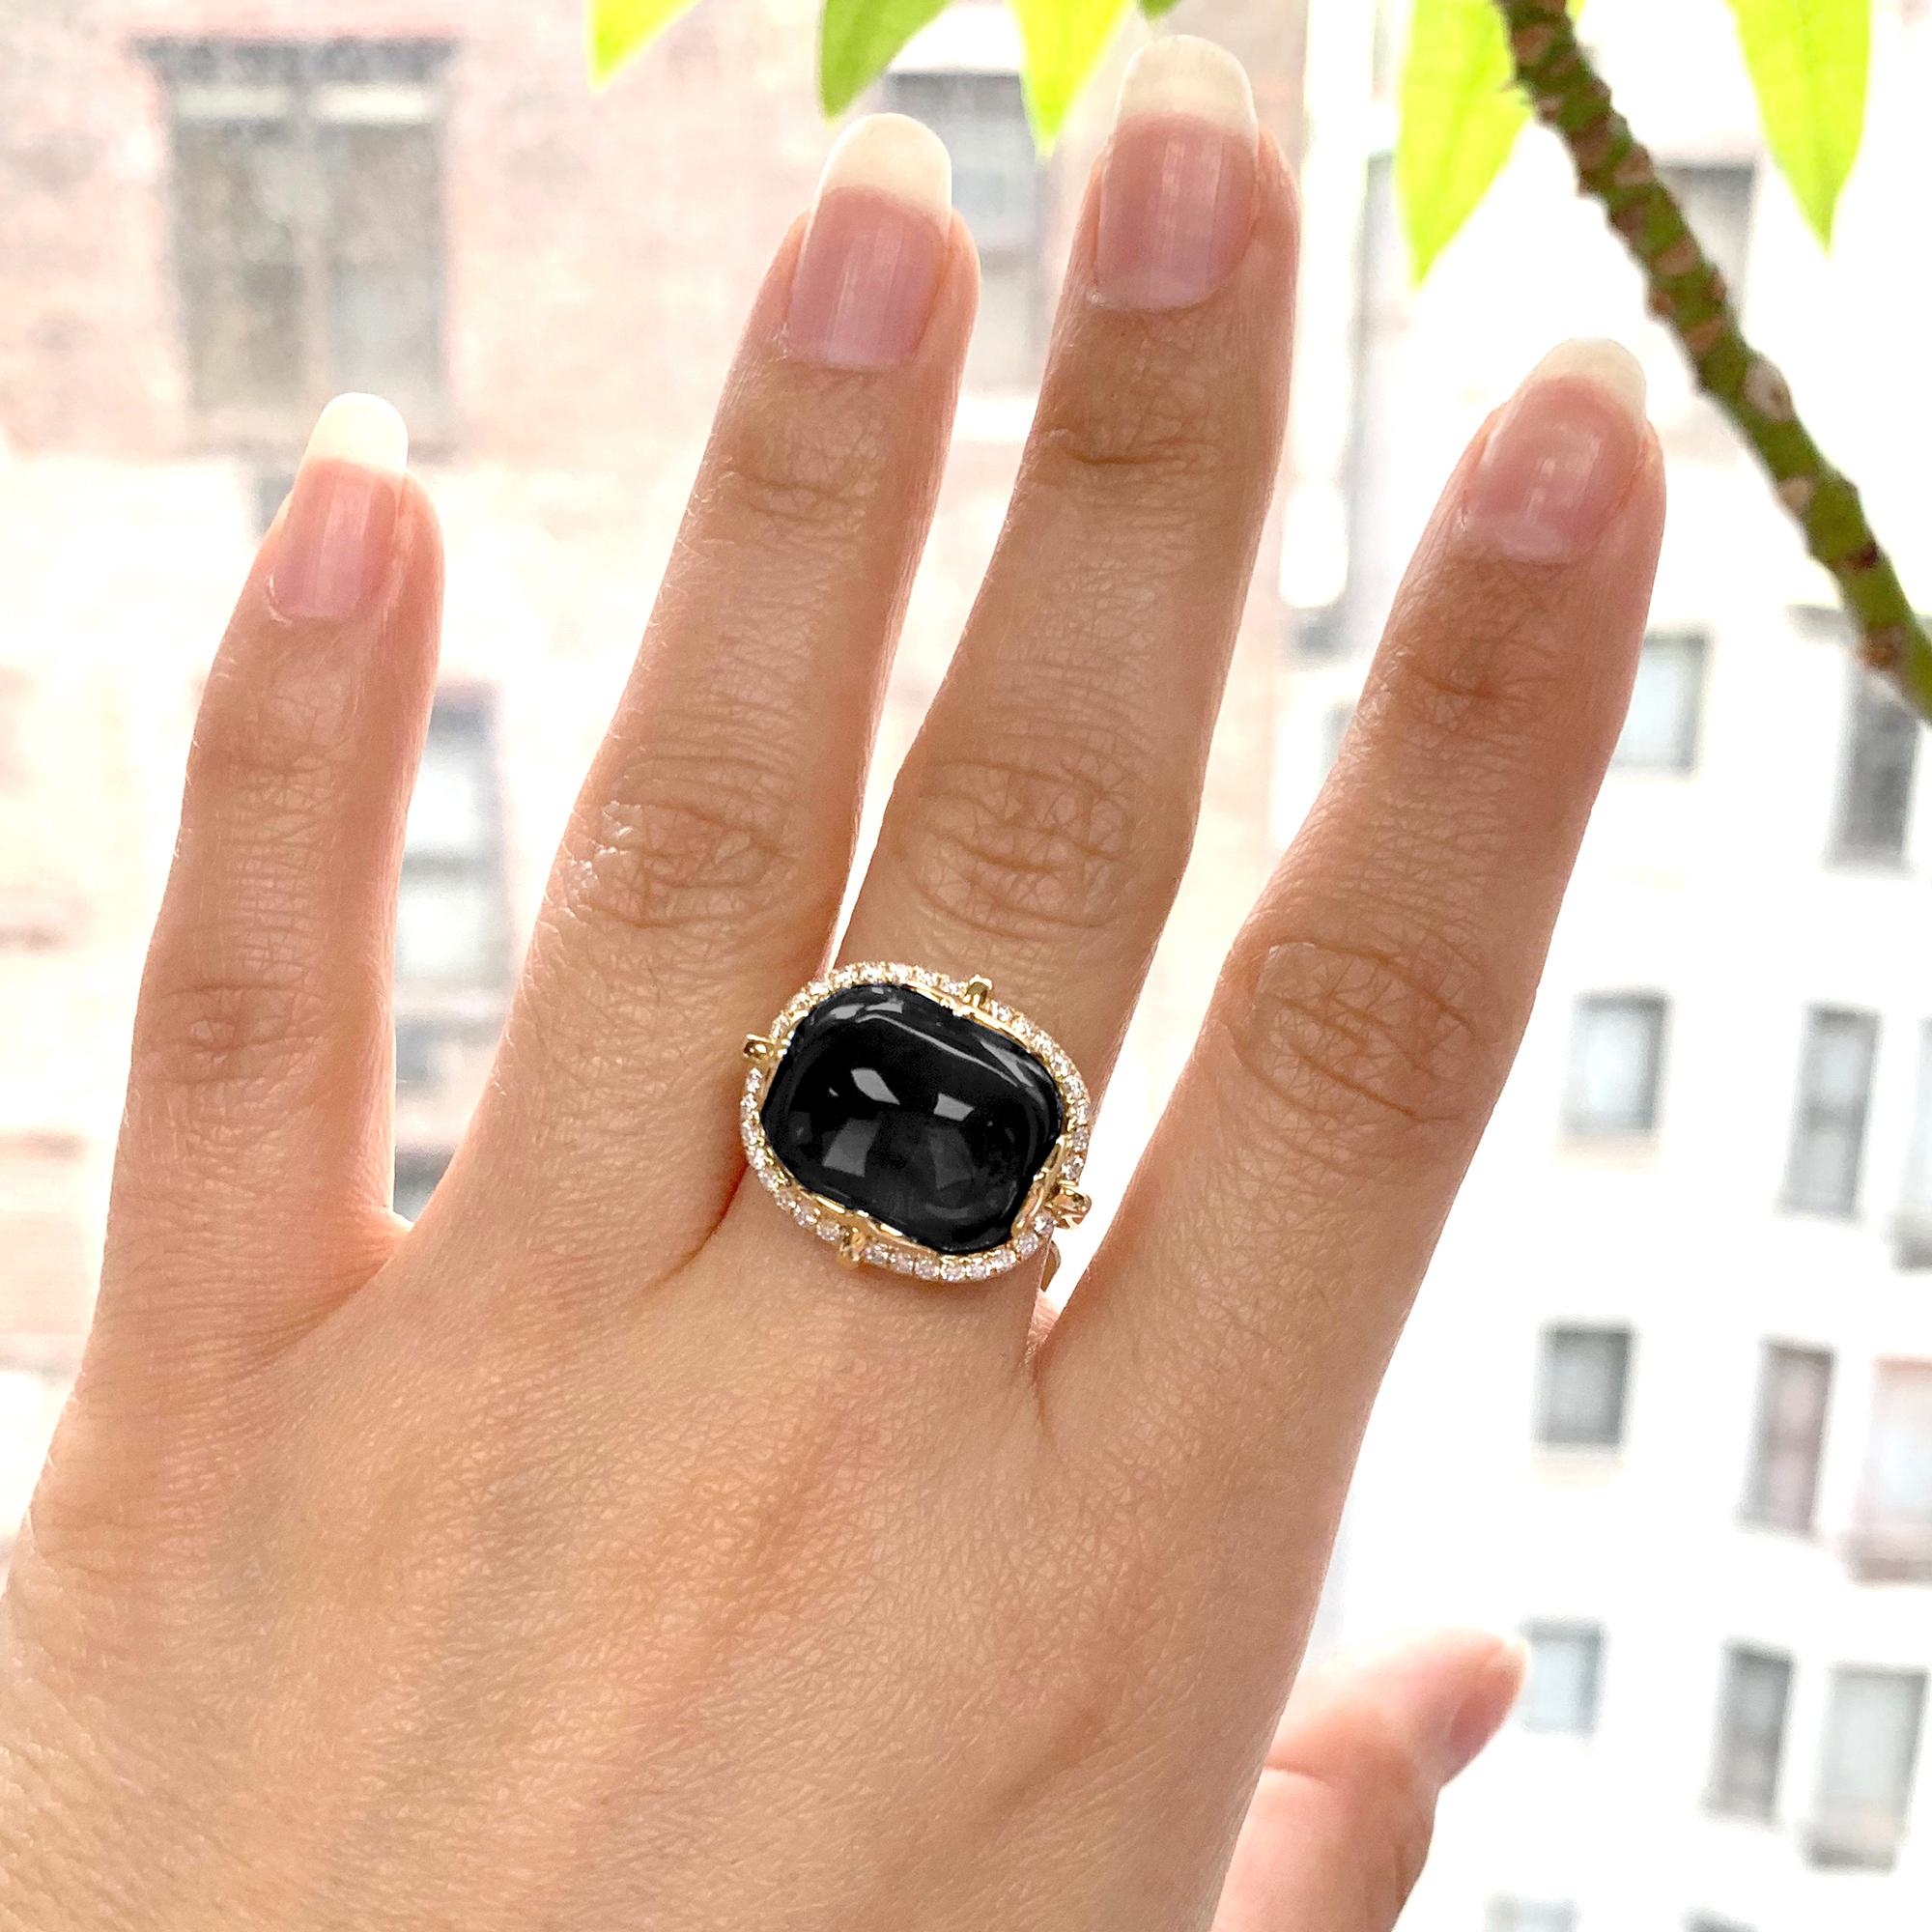 Onyx Cushion Cabochon Ring in 18K Yellow Gold with Diamonds, from 'Rock 'N Roll' Collection. Extensive collection of big and bold pieces. Like the music, this Rock ‘n Roll collection is electric in color and very stimulating to the eye. These